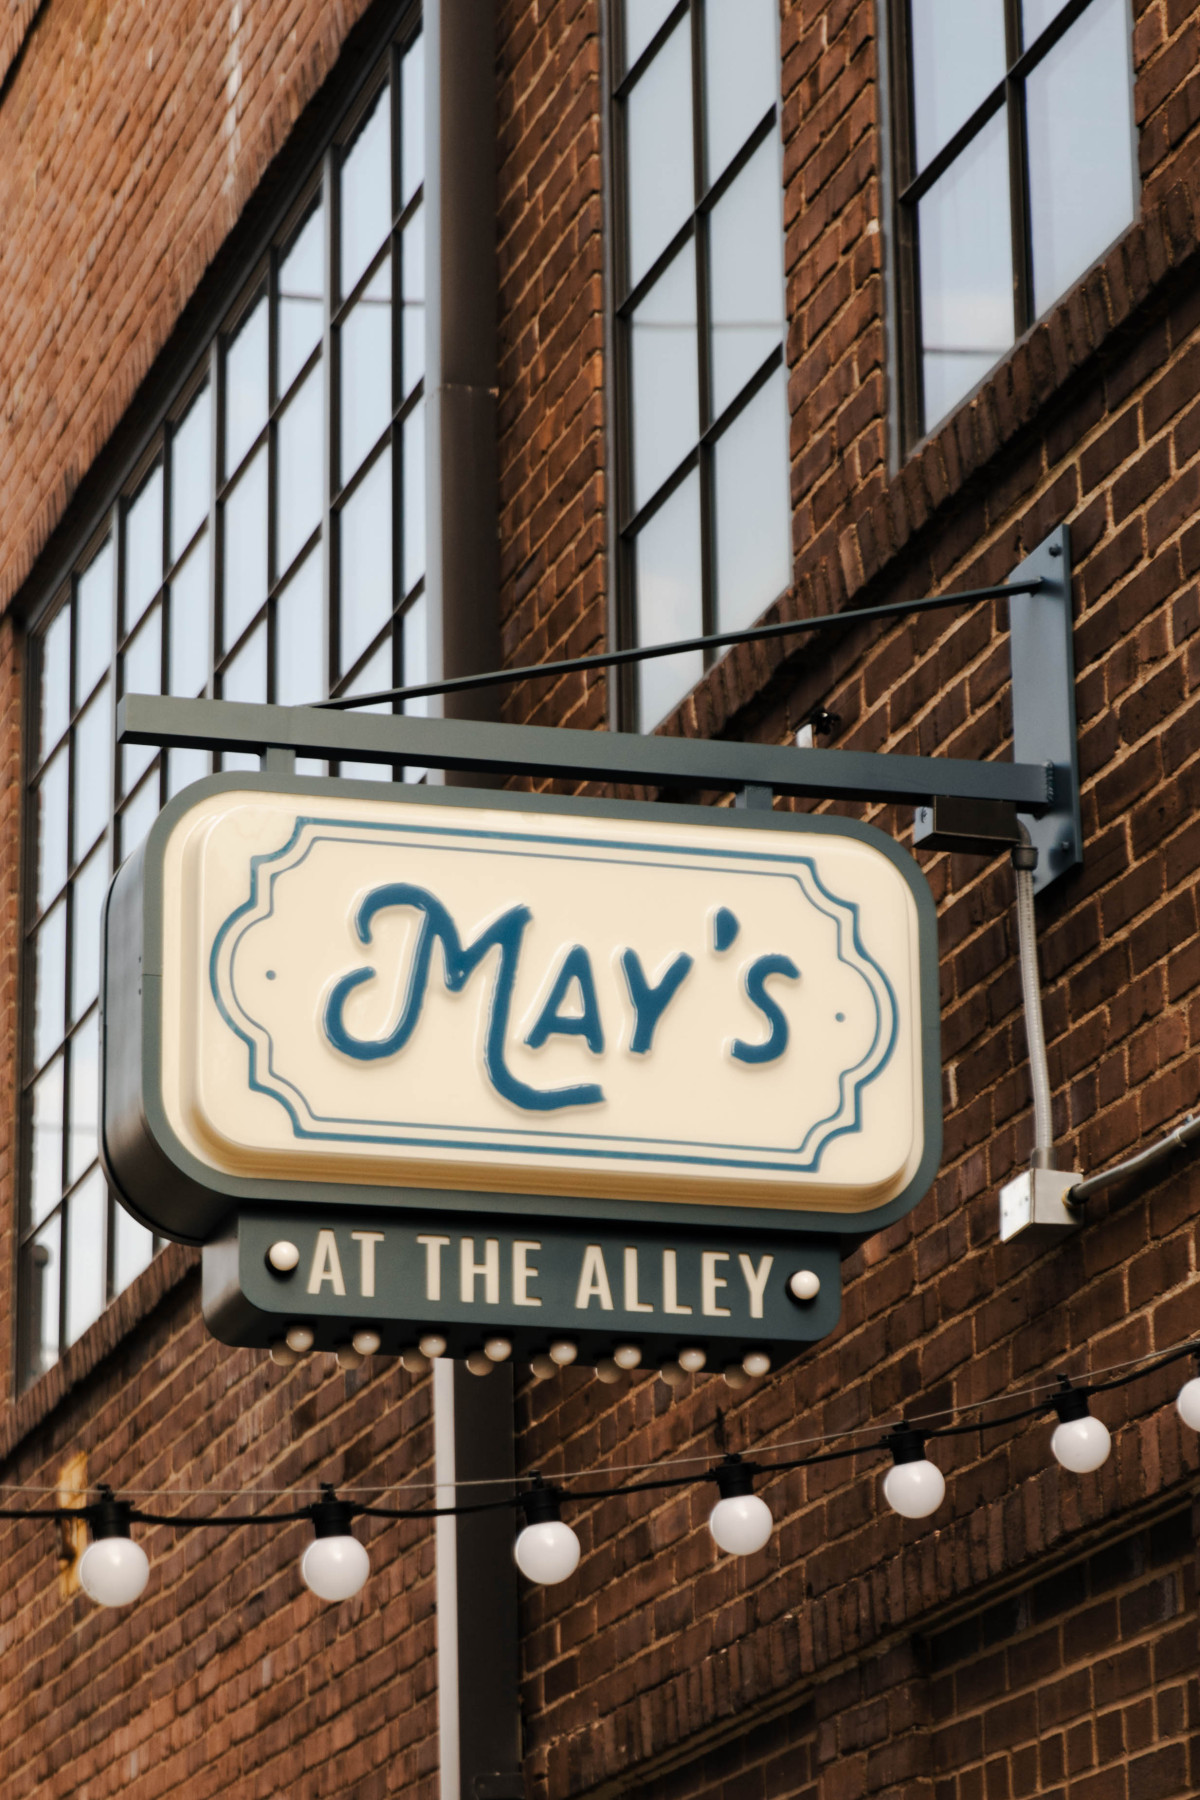 
												<a href="/happenings/mays-opens-at-soho-house-nashville">
													<strong>May's Opens at Soho House Nashville</strong>
													<br />Your new favorite neighborhood hotspot
												</a>
											